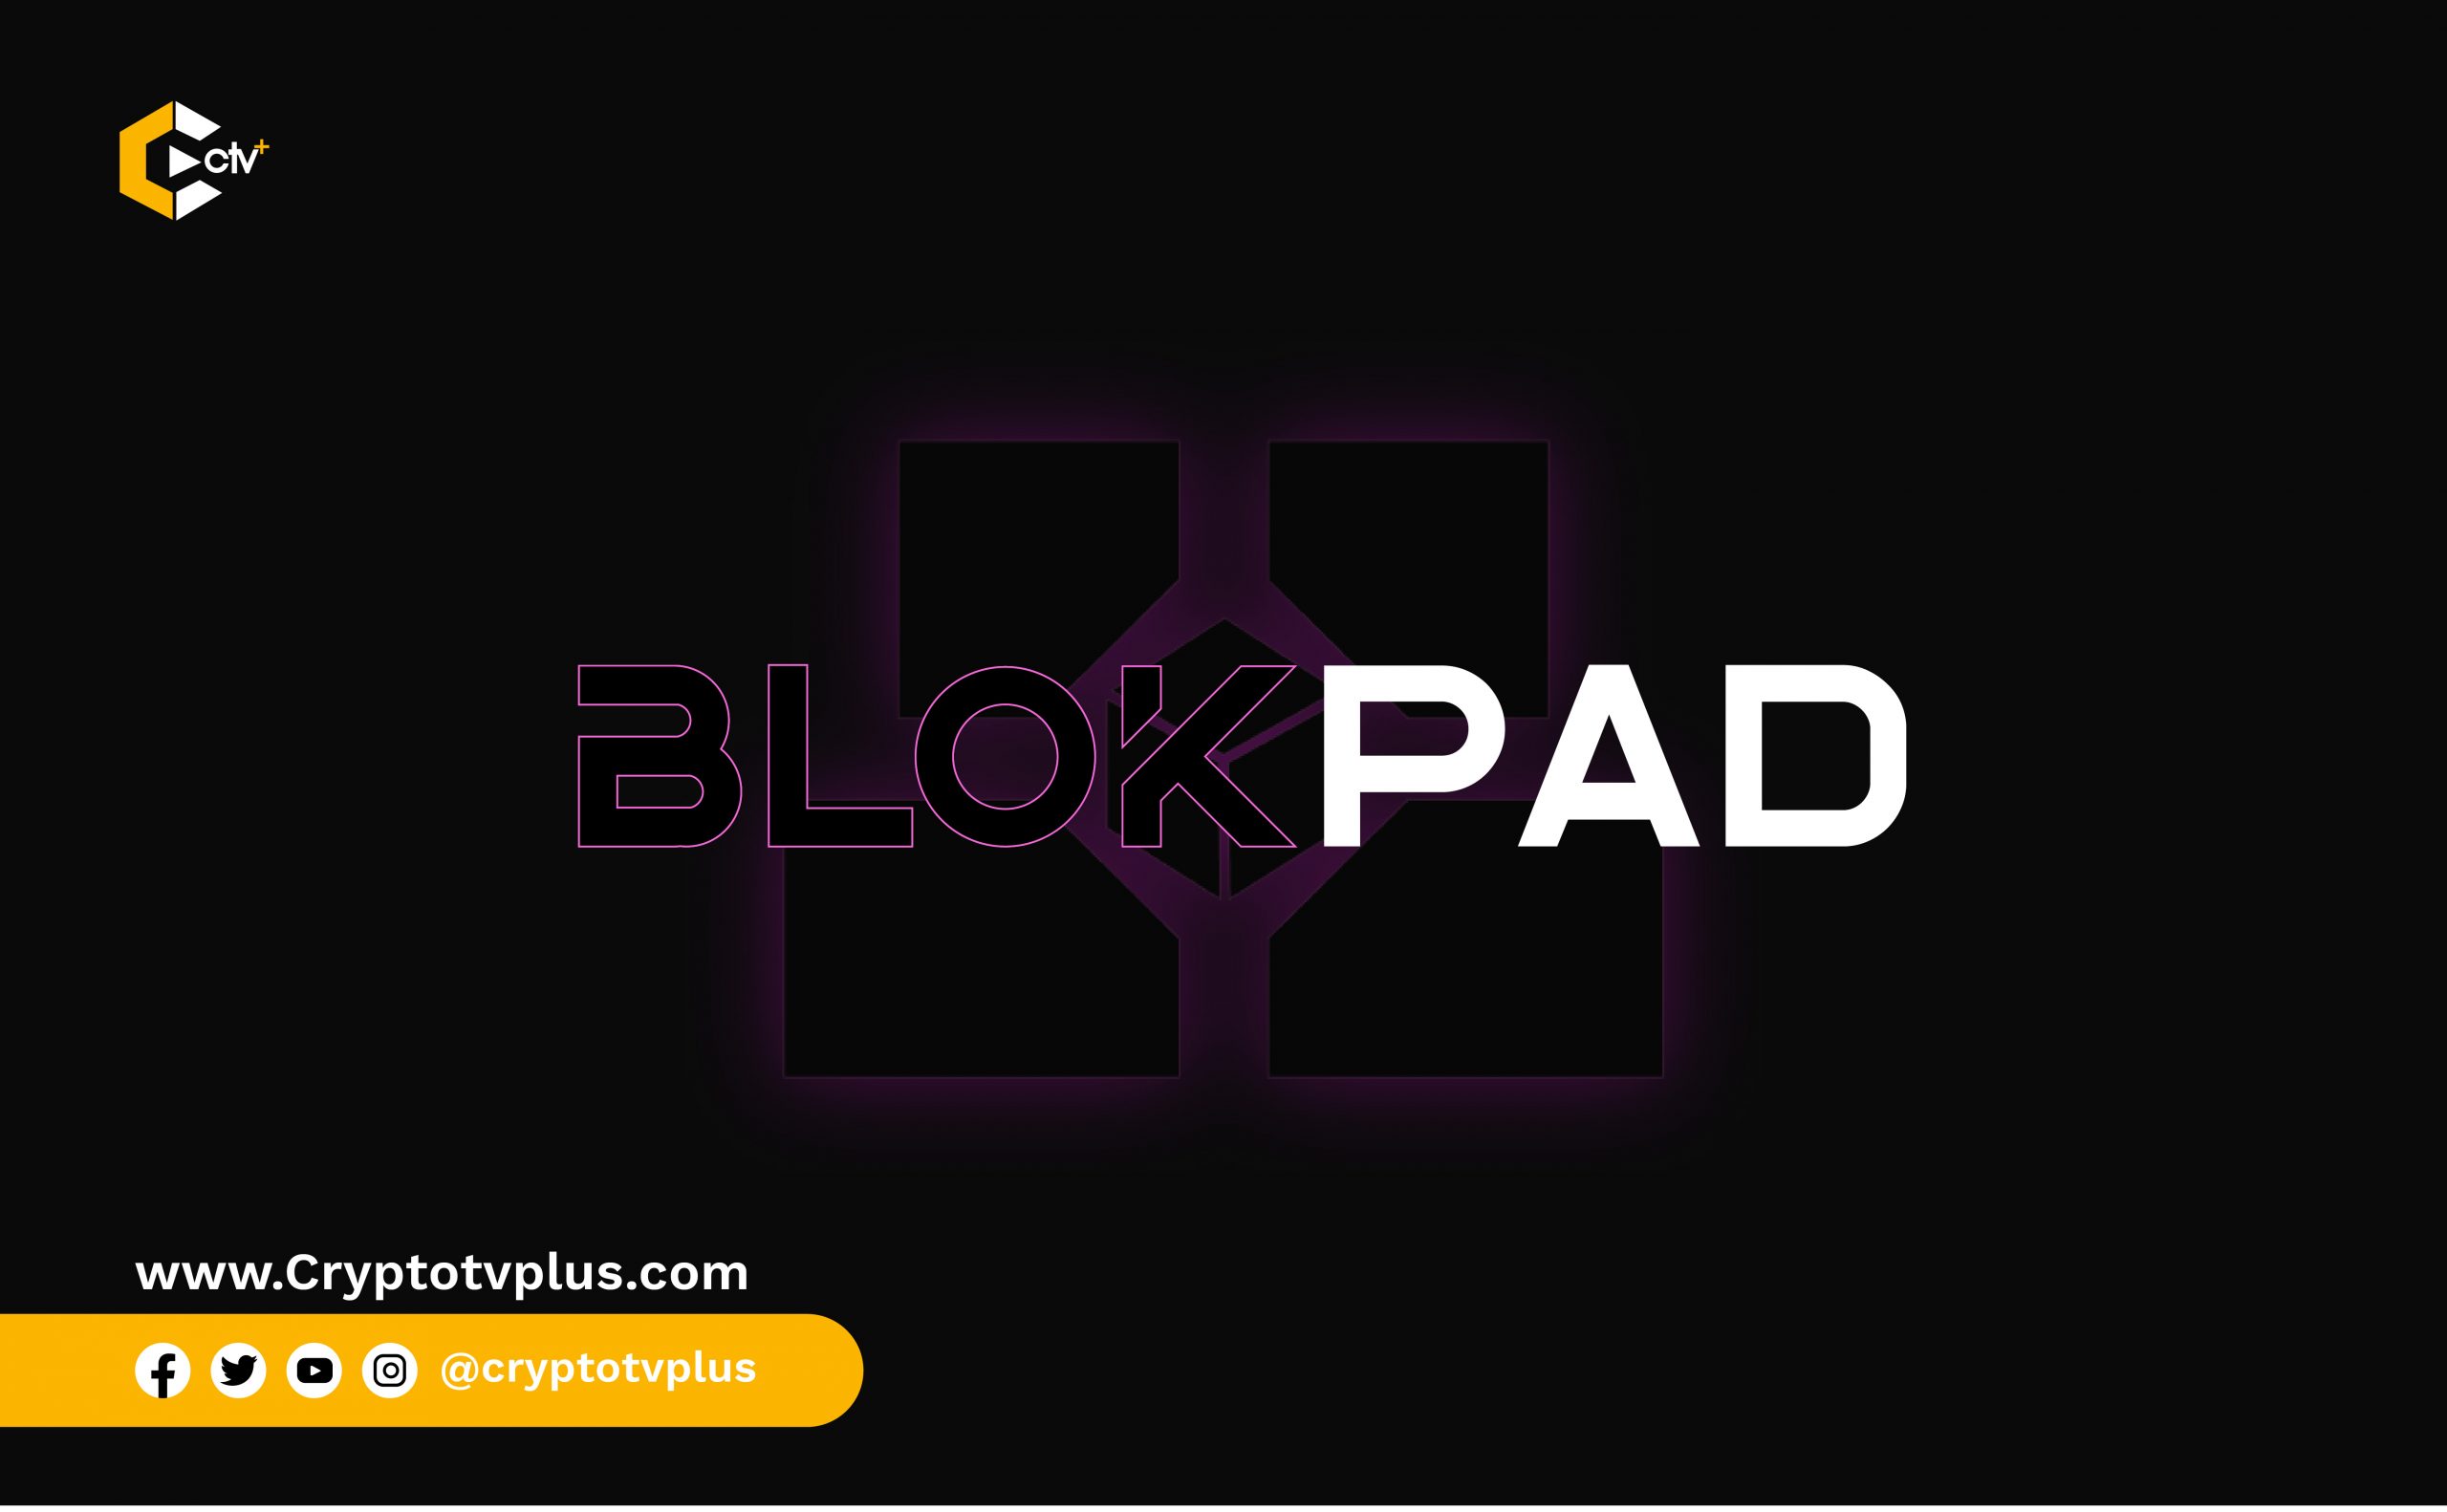 BlokPad: An Overview of Bloktopia's Metaverse Launchpad 

